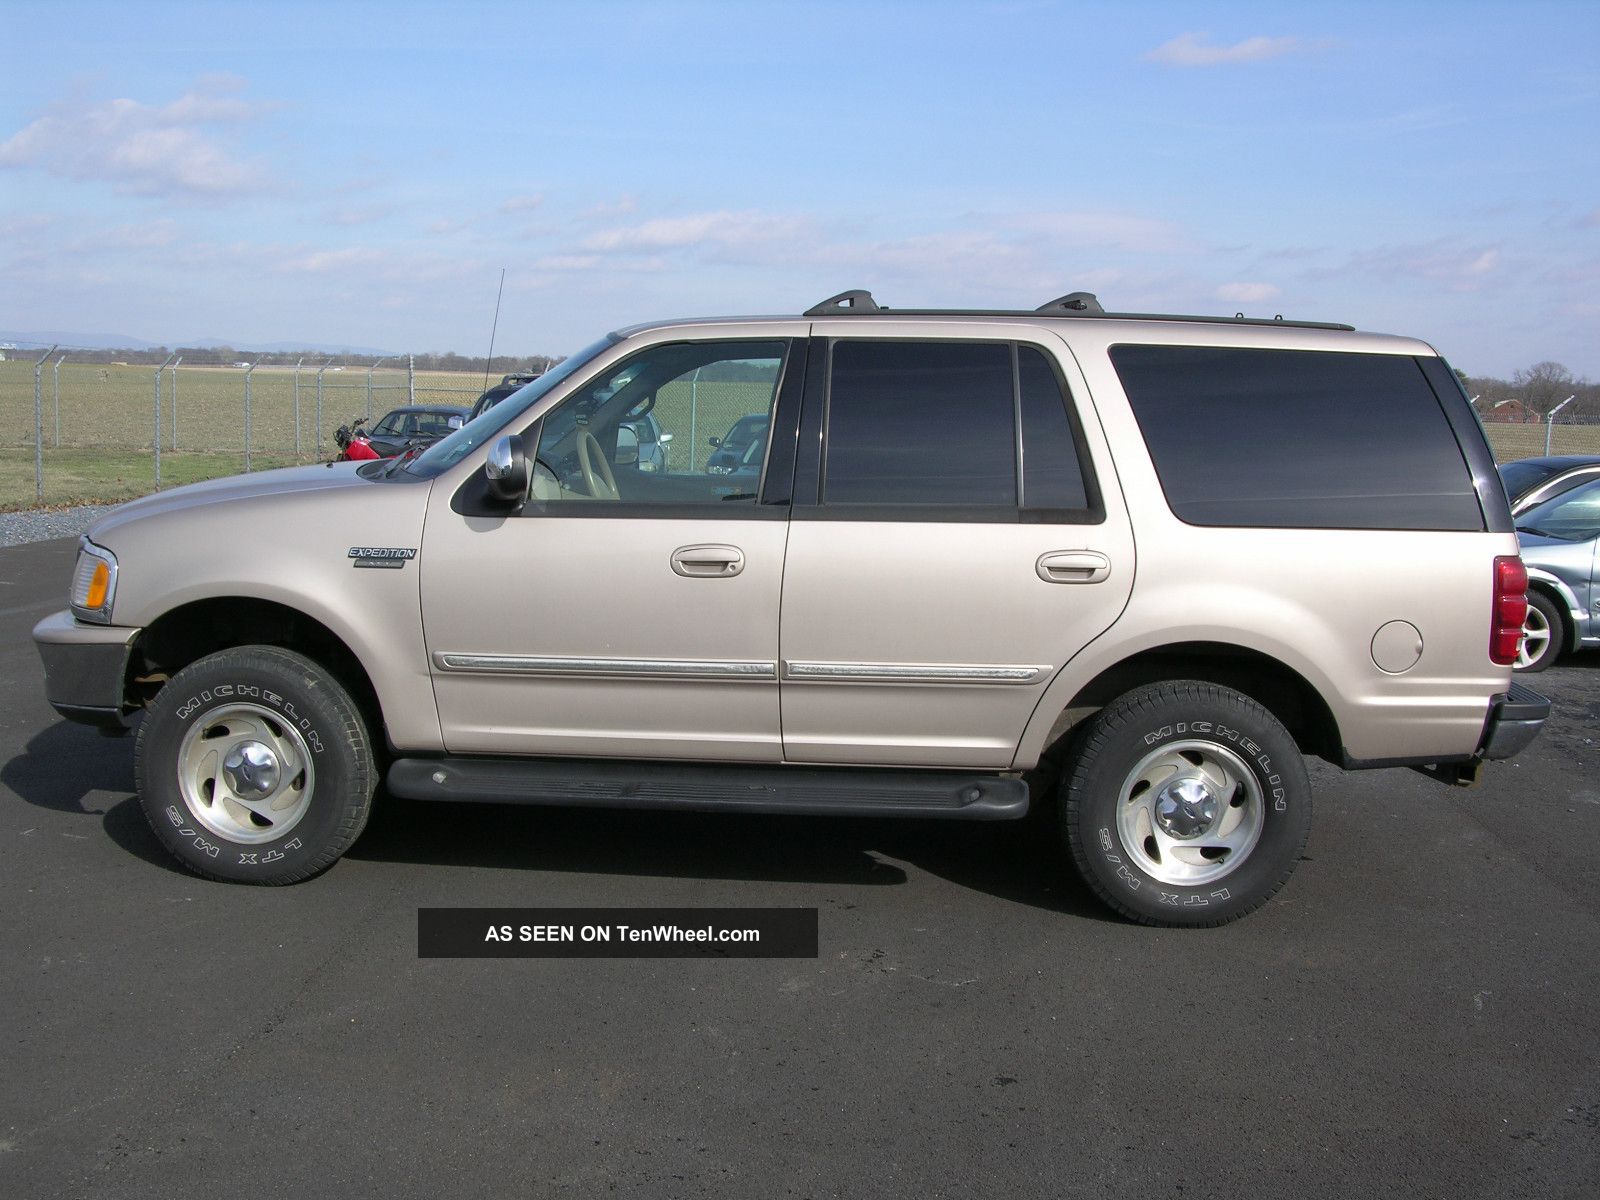 1998 Ford expedition eddie bauer owners manual pdf #1